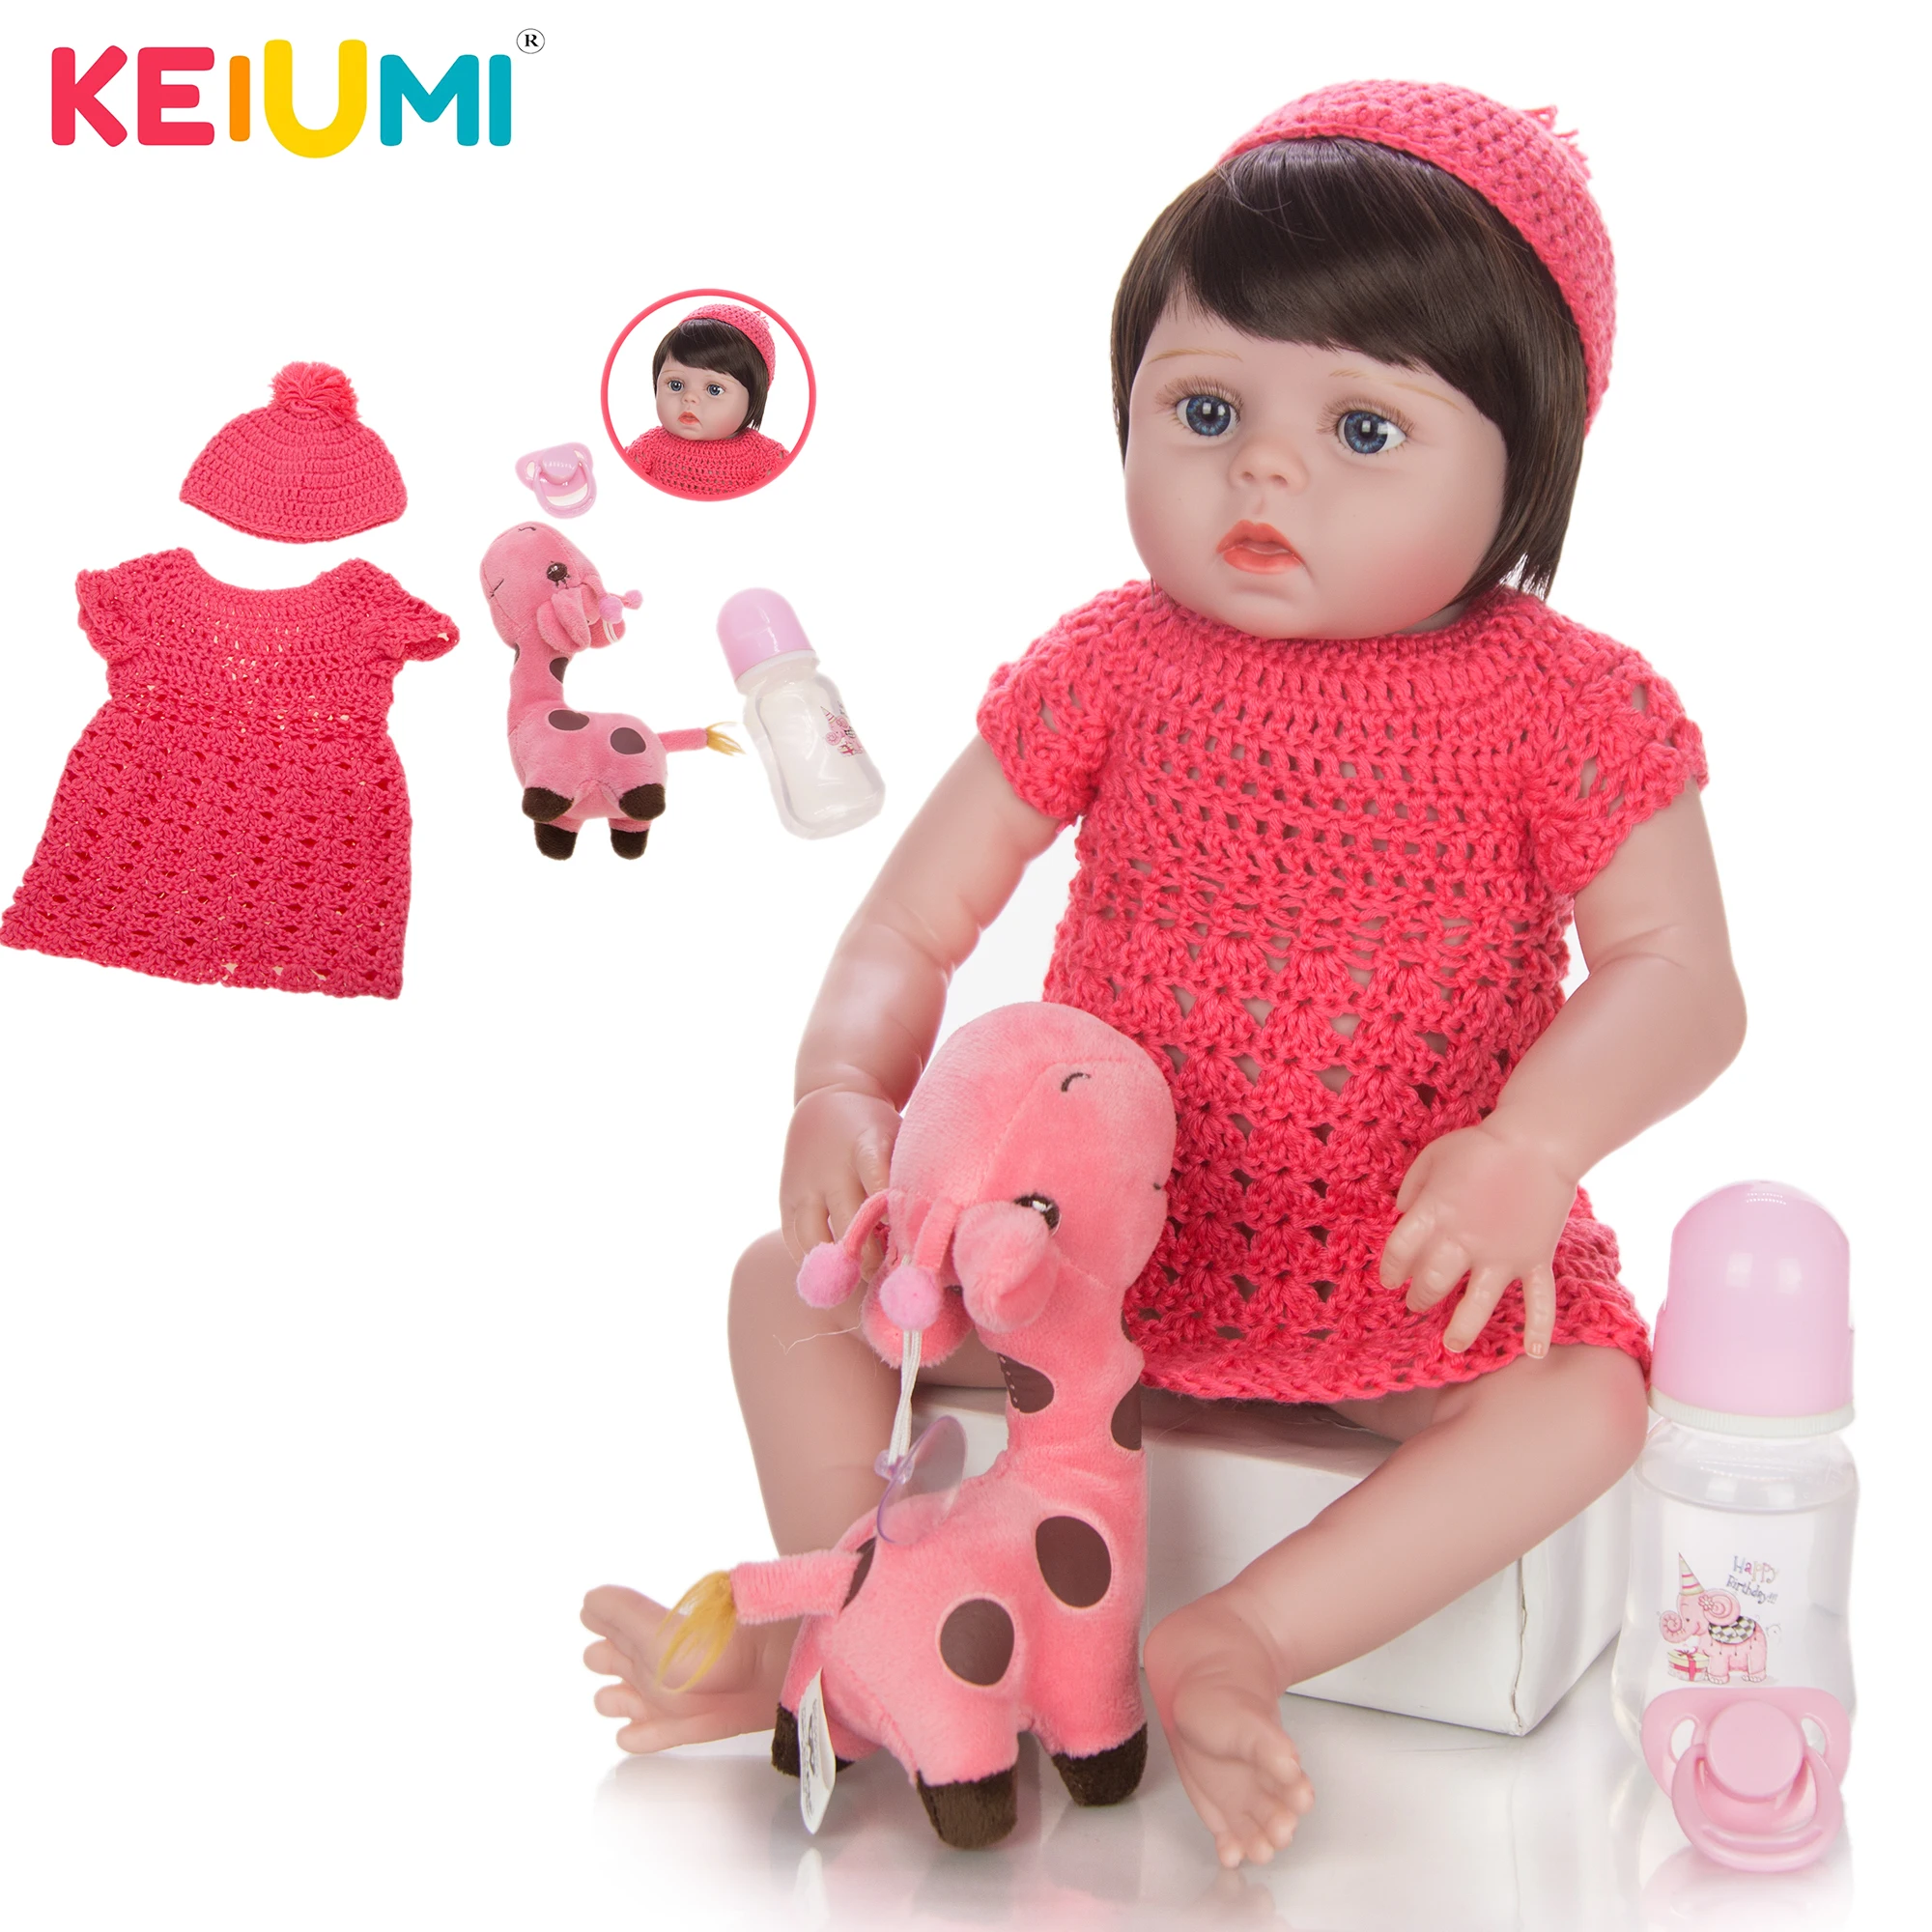 KEIUMI Waterproof New Design 19 Inch Reborn Baby Girl Doll One Of Six Full Silicone Body Dolls DIY Babies For Child Toys | Игрушки и